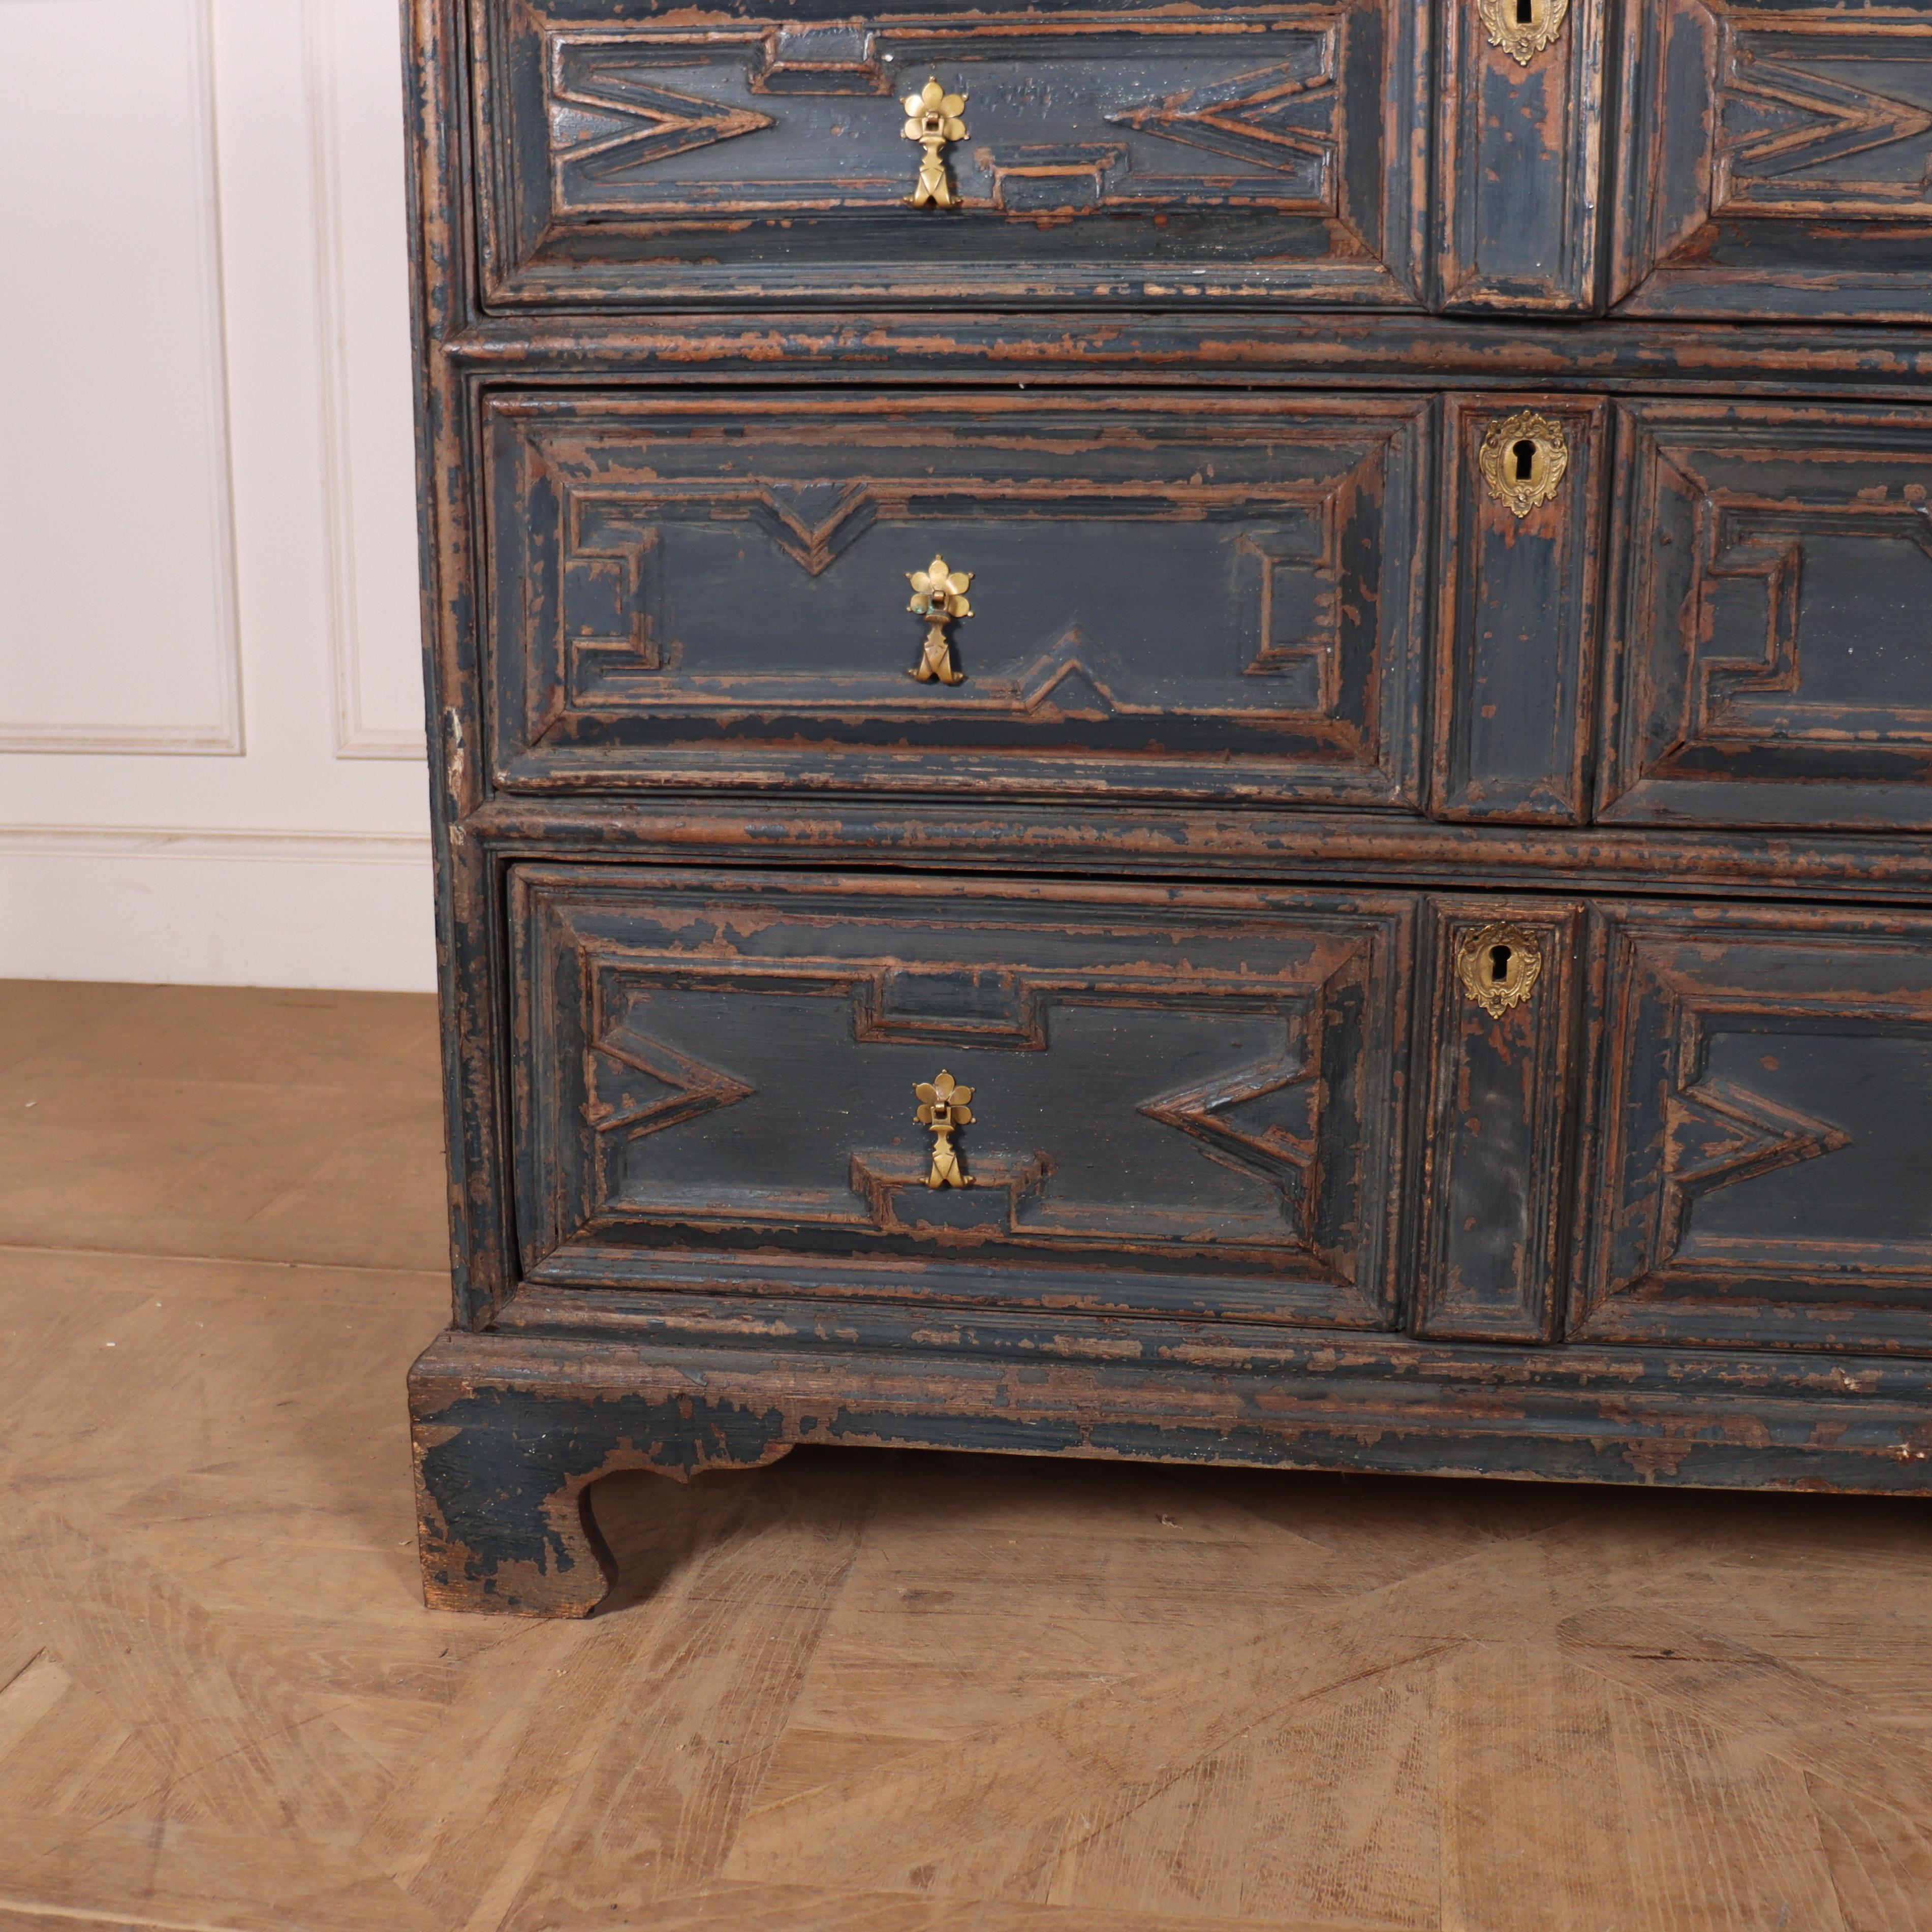 Early 18th C English painted oak geometric chest of drawers. 1720.

Reference: 7876

Dimensions
44.5 inches (113 cms) Wide
23 inches (58 cms) Deep
41 inches (104 cms) High.